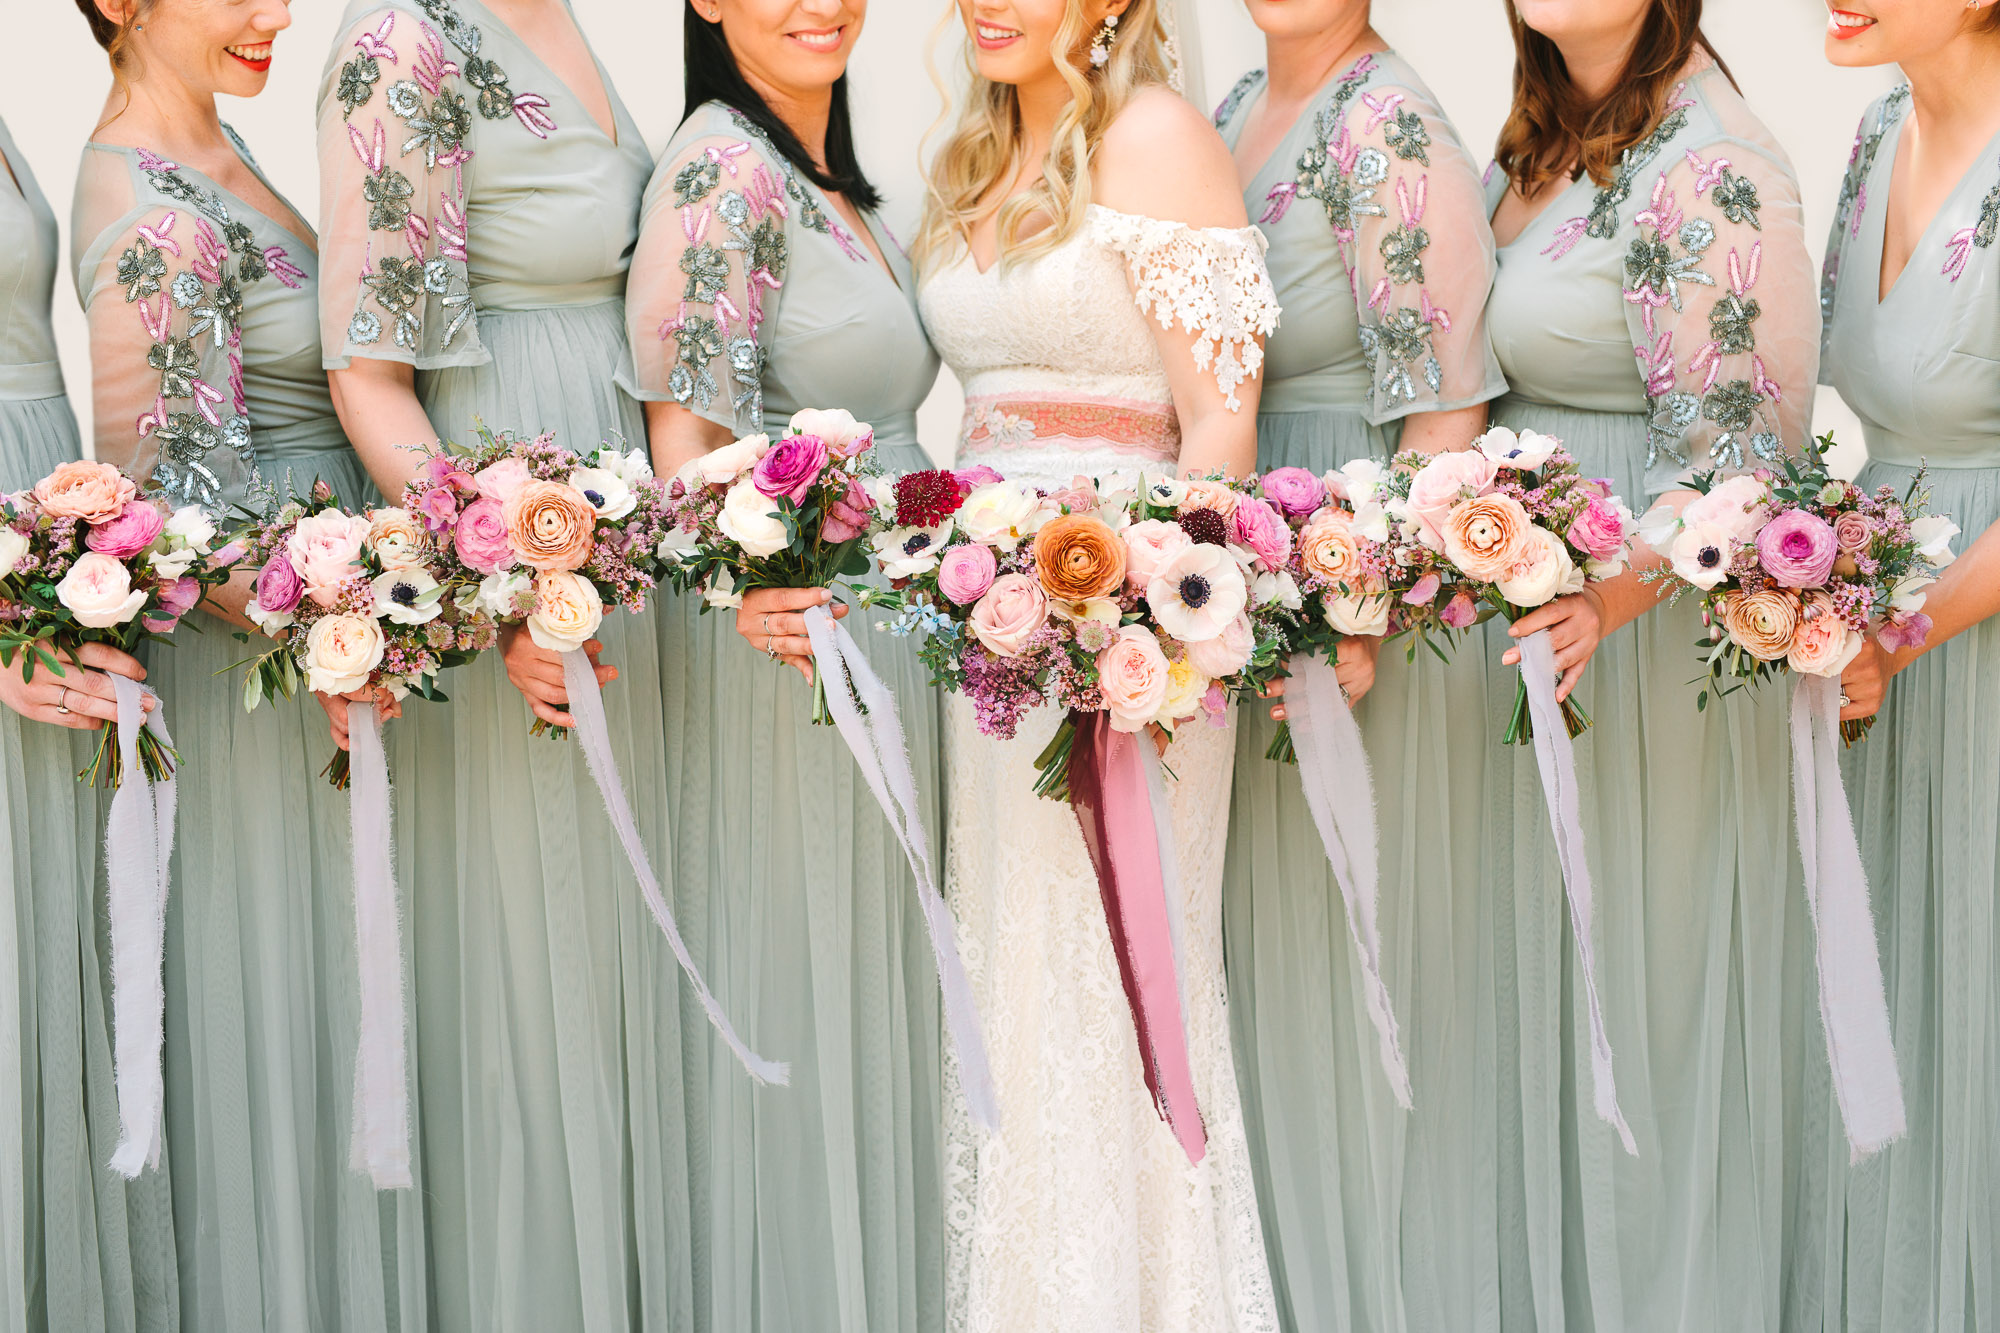 Bride and bridesmaids with bouquets by Mary Costa Photography